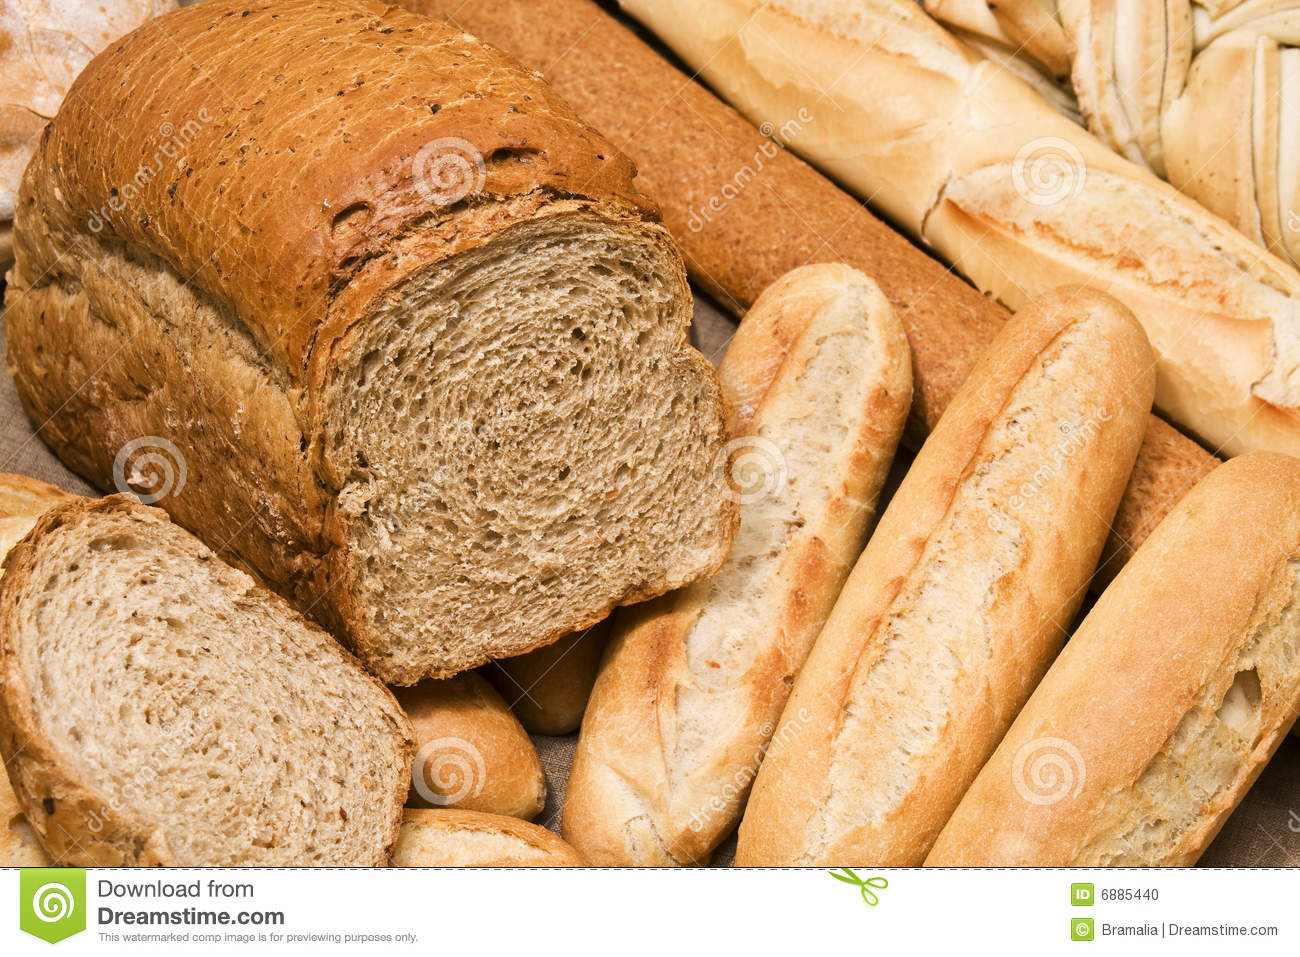 Up Of A Sliced Whole Grain Bread And Baguettes  Focus On Brown Bread